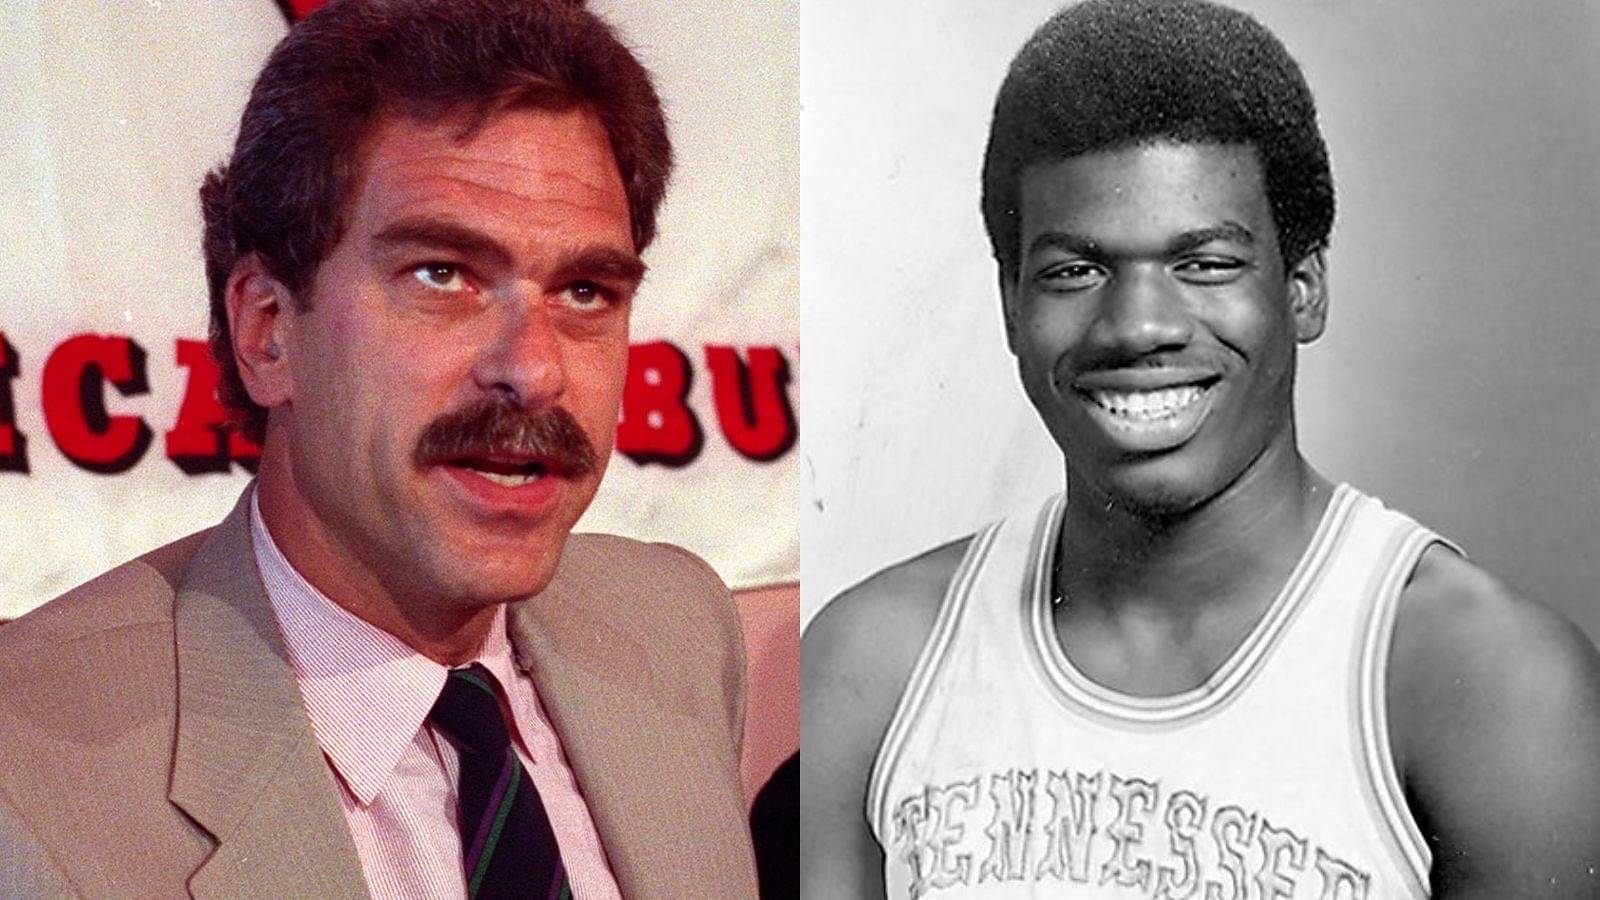 “Bernard King was arrested for drunk driving and cocaine possession”: When the Knicks legend's substance use problem almost landed Phil Jackson a Head coaching job 10-years earlier